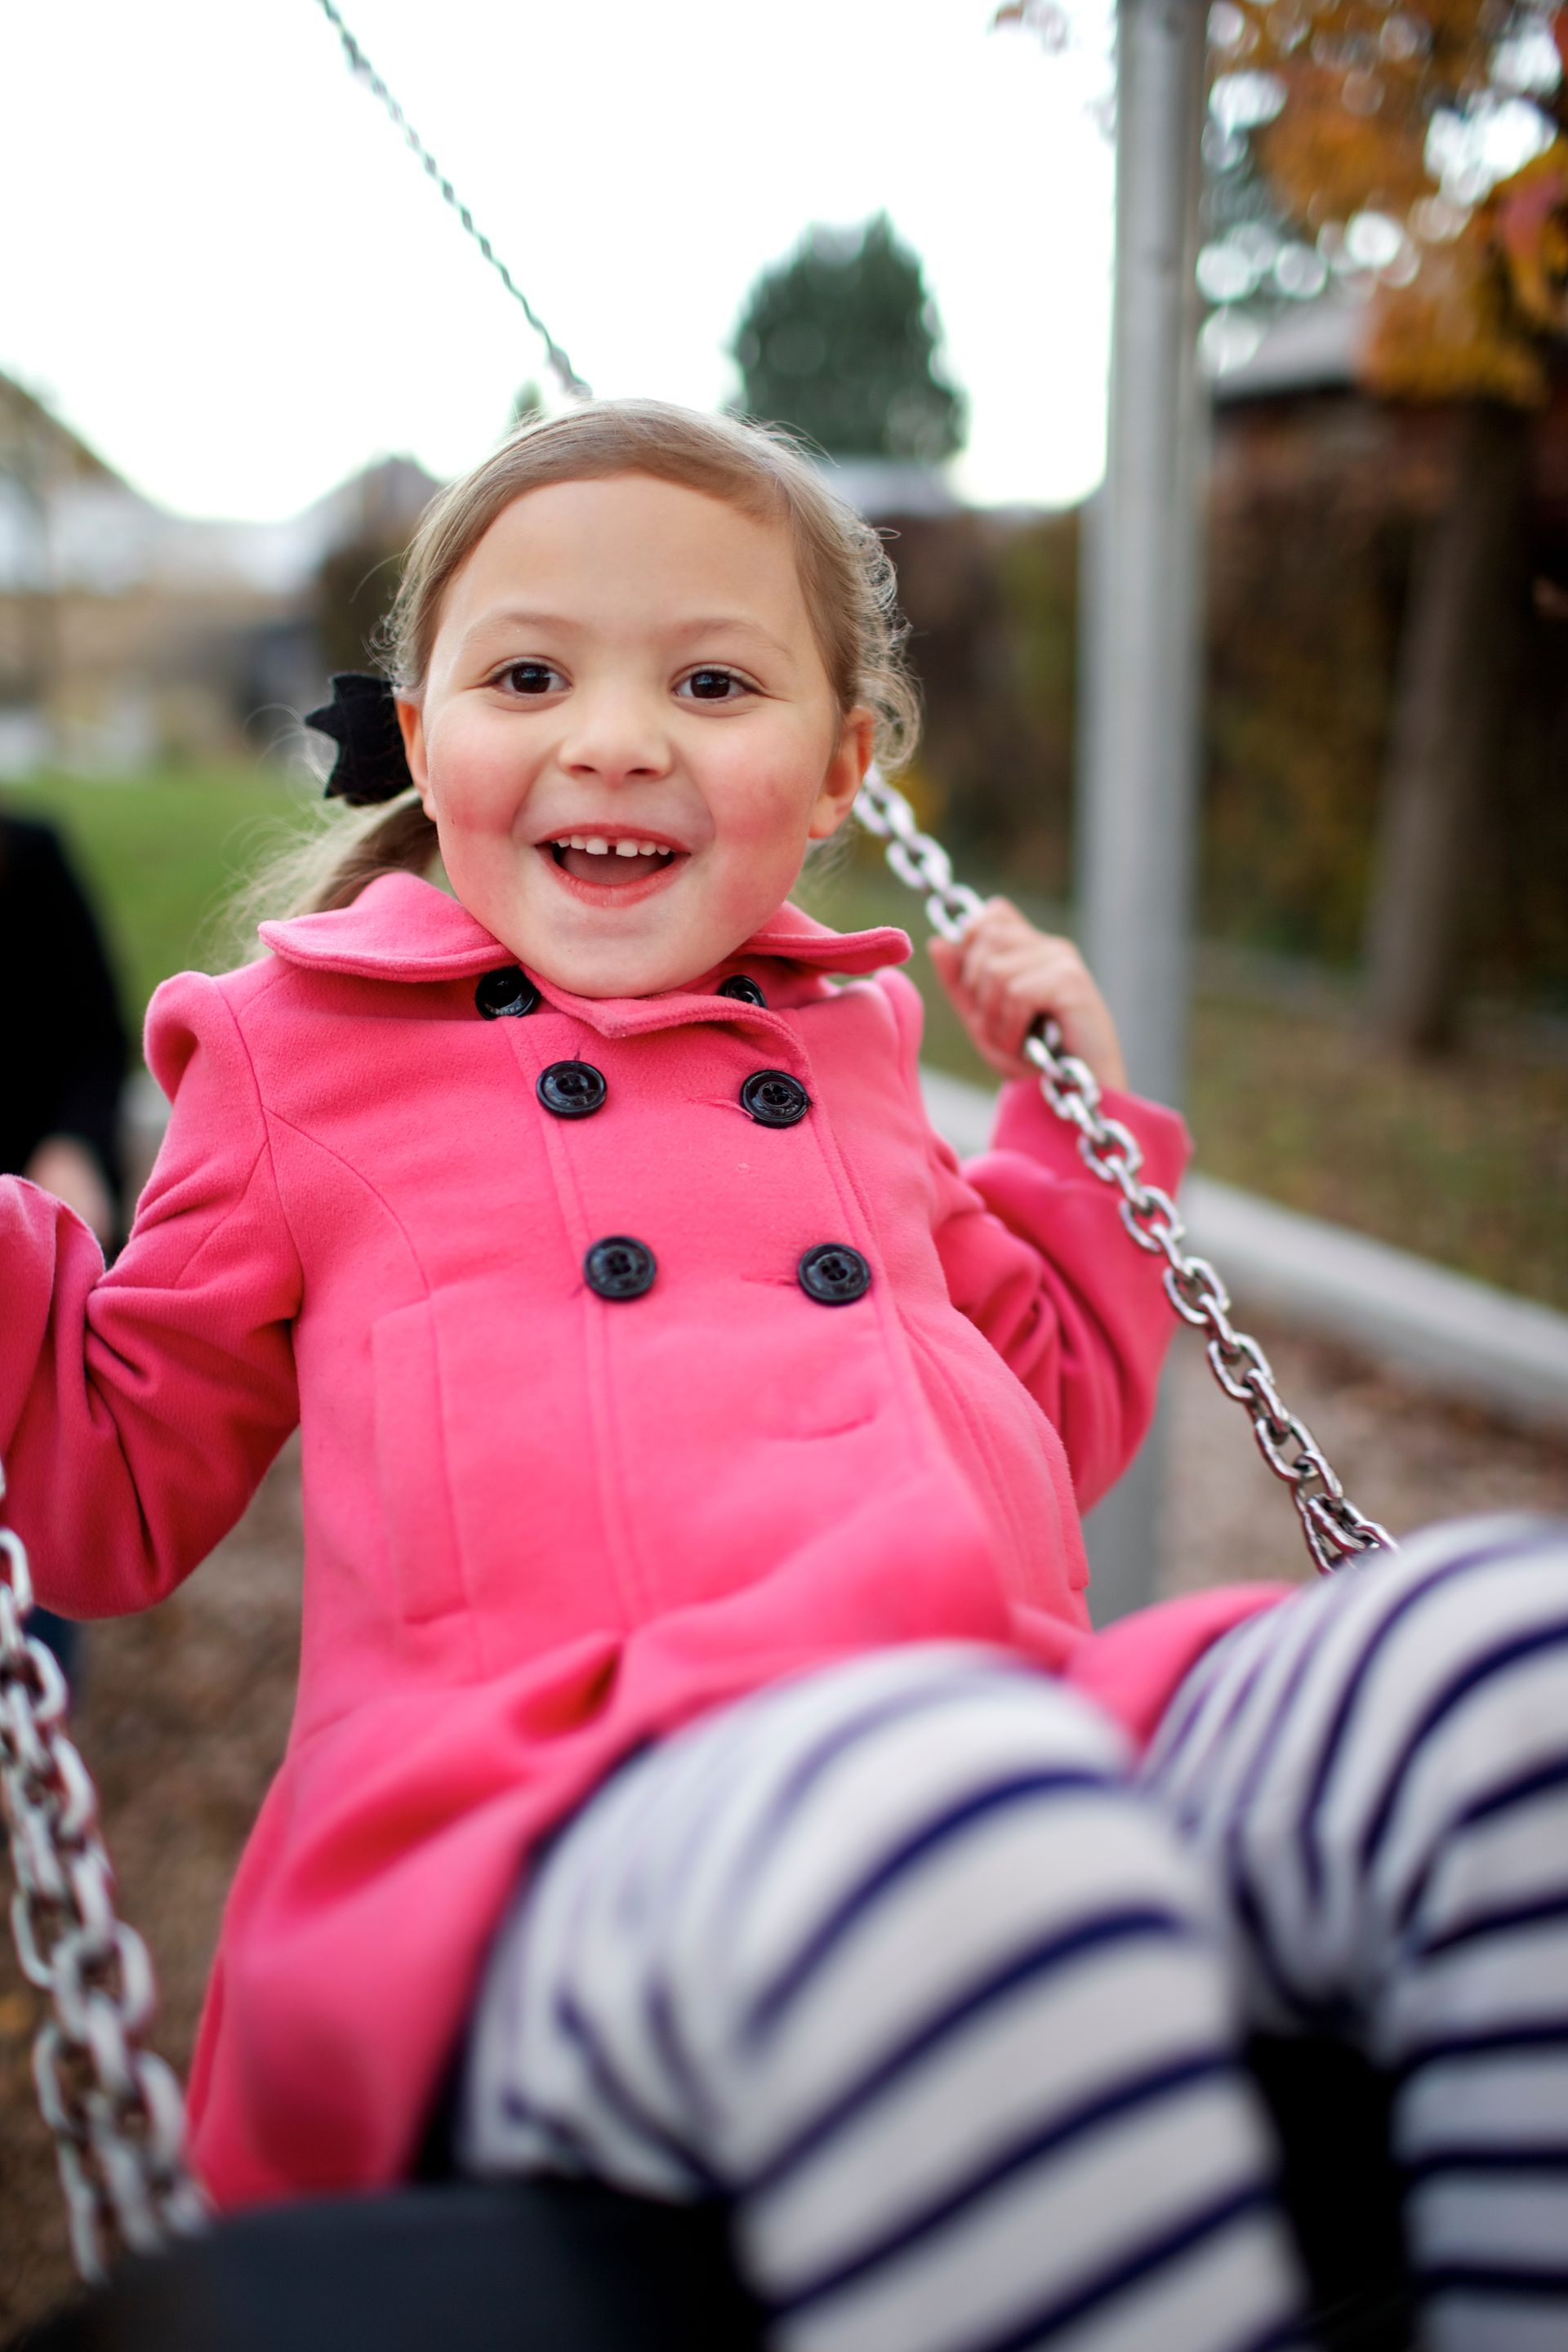 A girl in a pink coat plays on a swing.